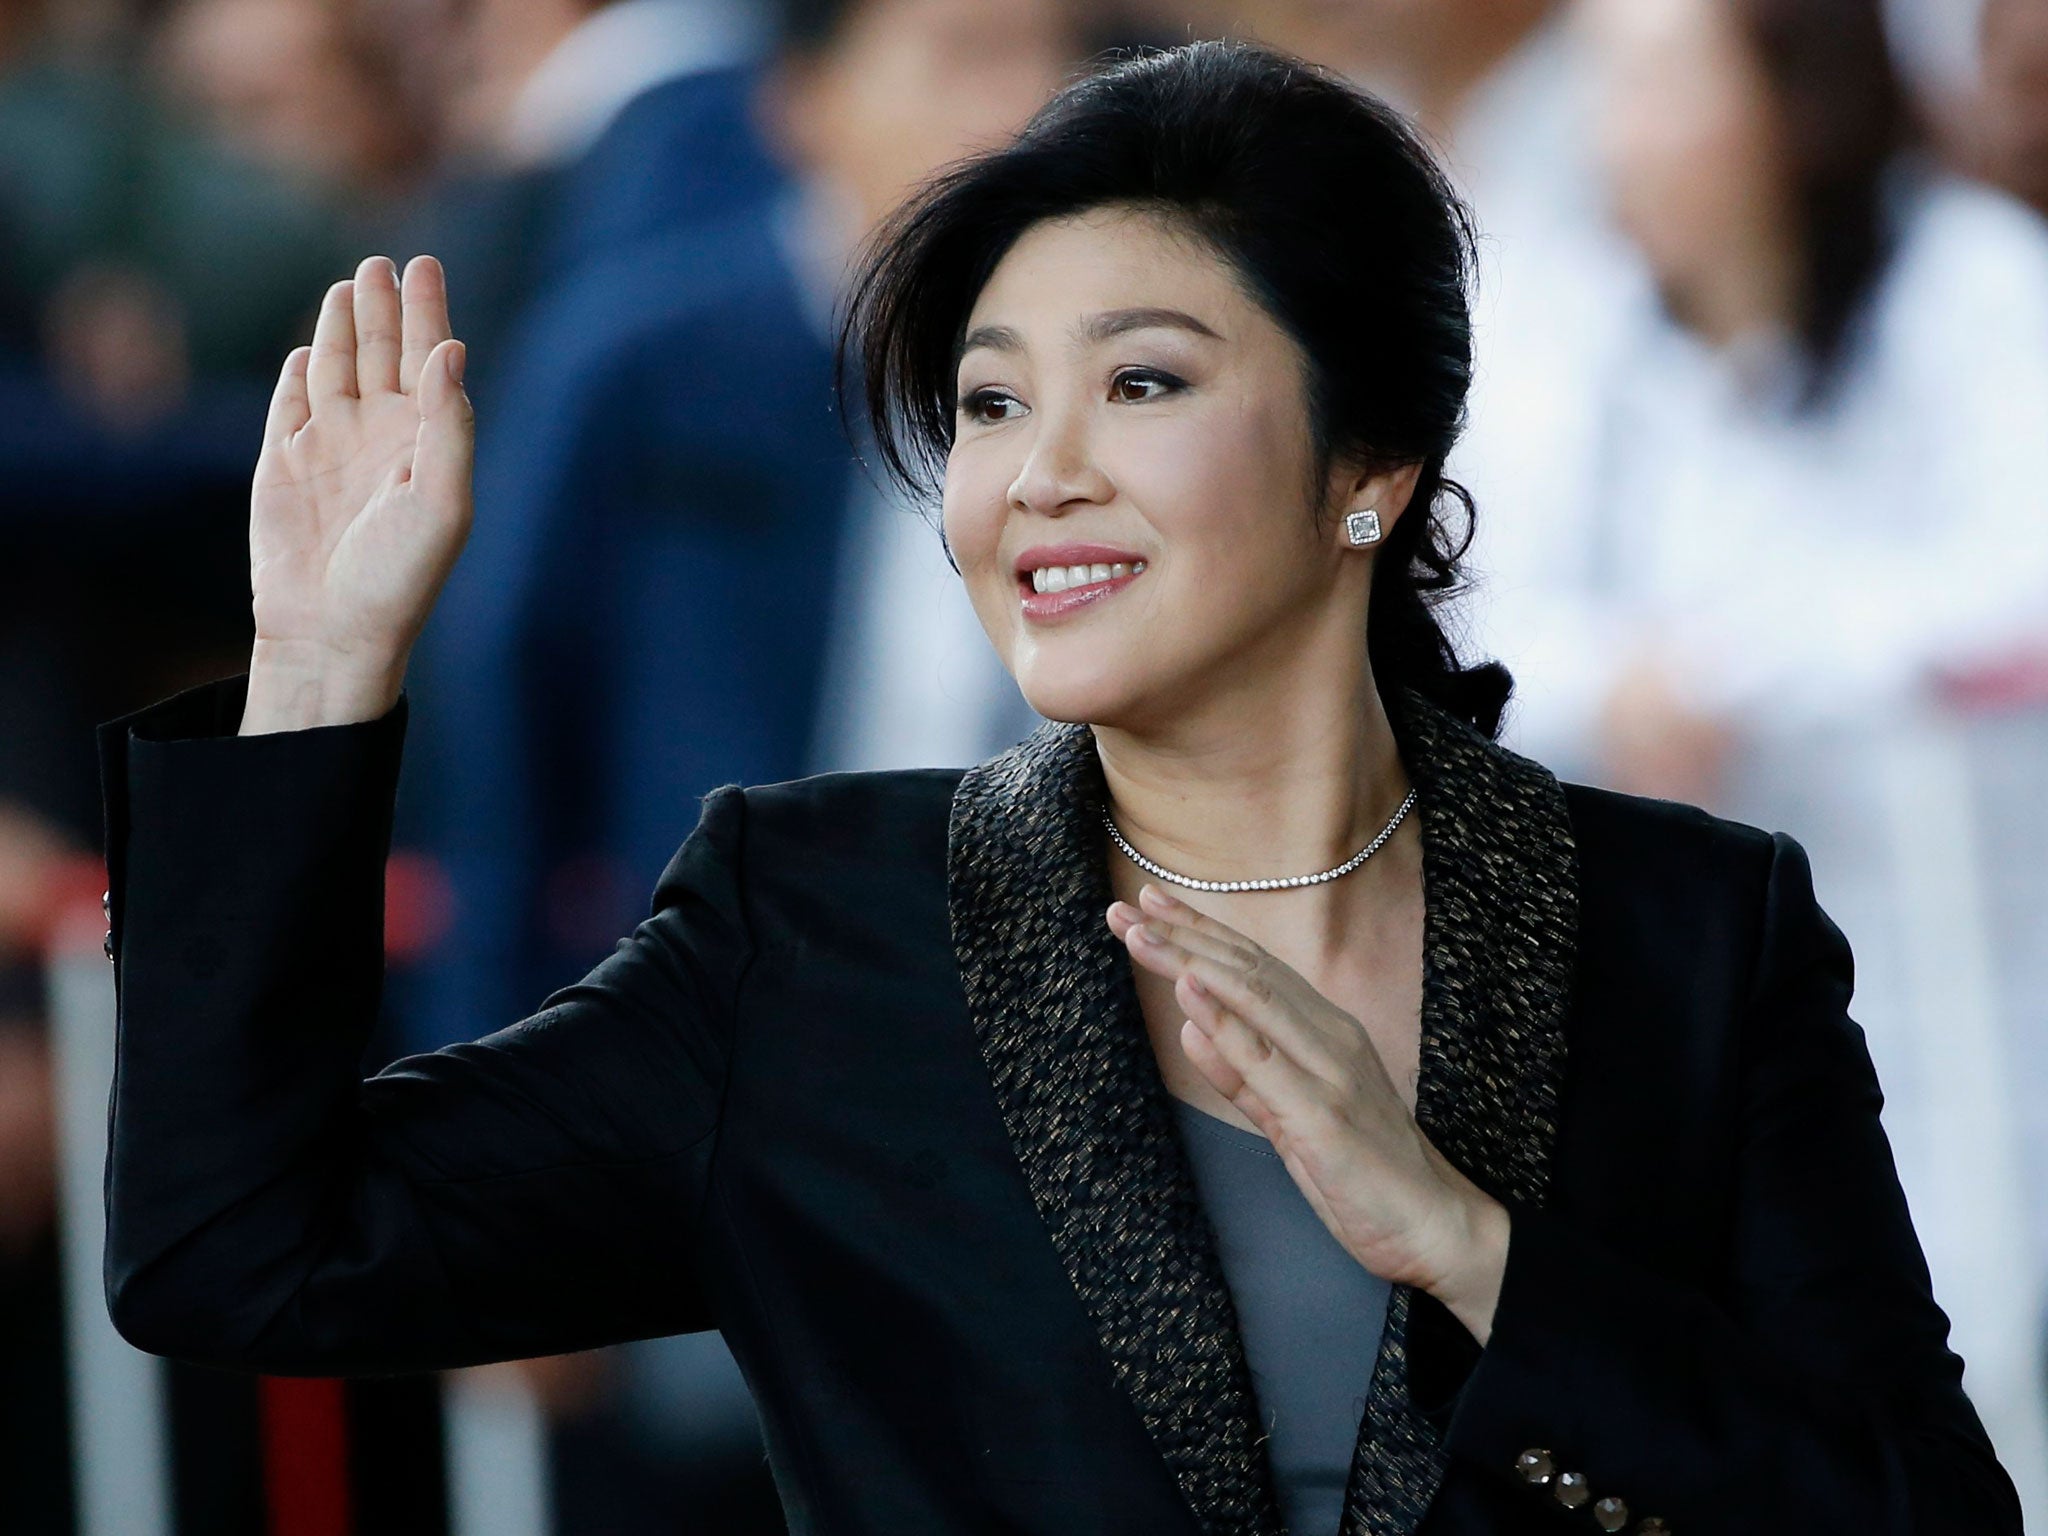 Yingluck Shinawatra waves to supporters as she arrives to deliver closing statements in her trial on 1 August